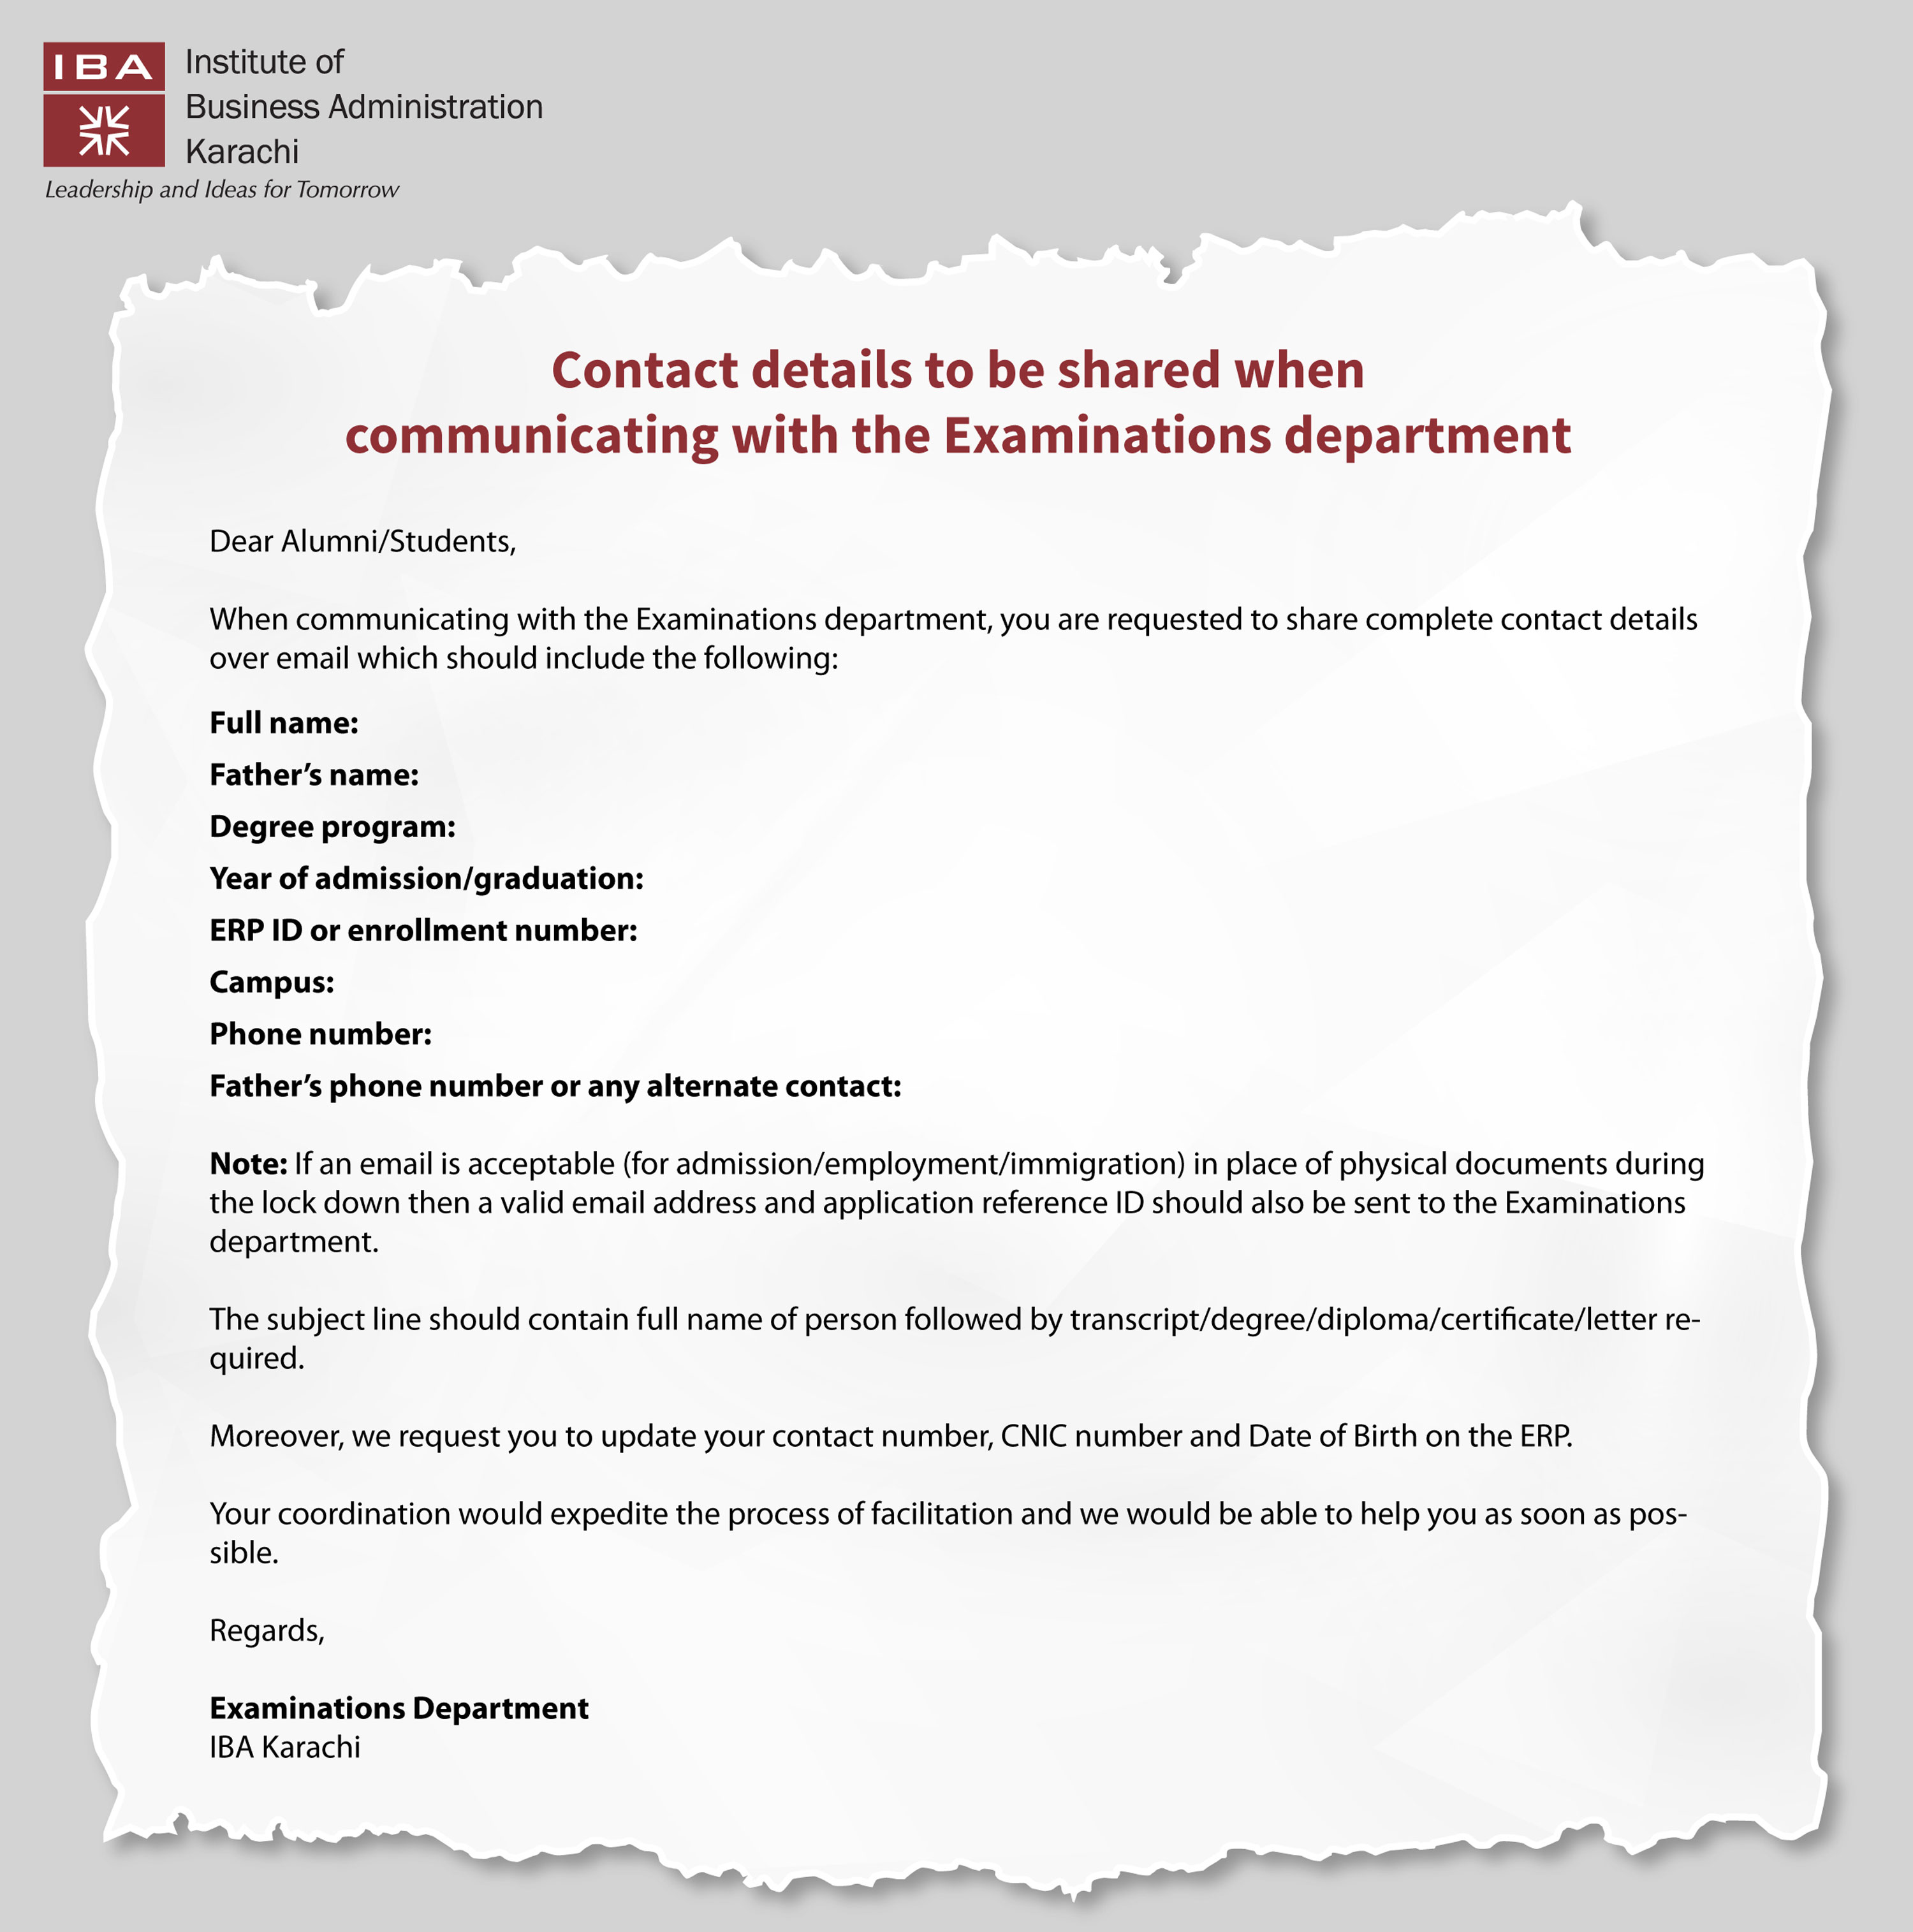 Contact details to be shared when communicating with the Examinations department